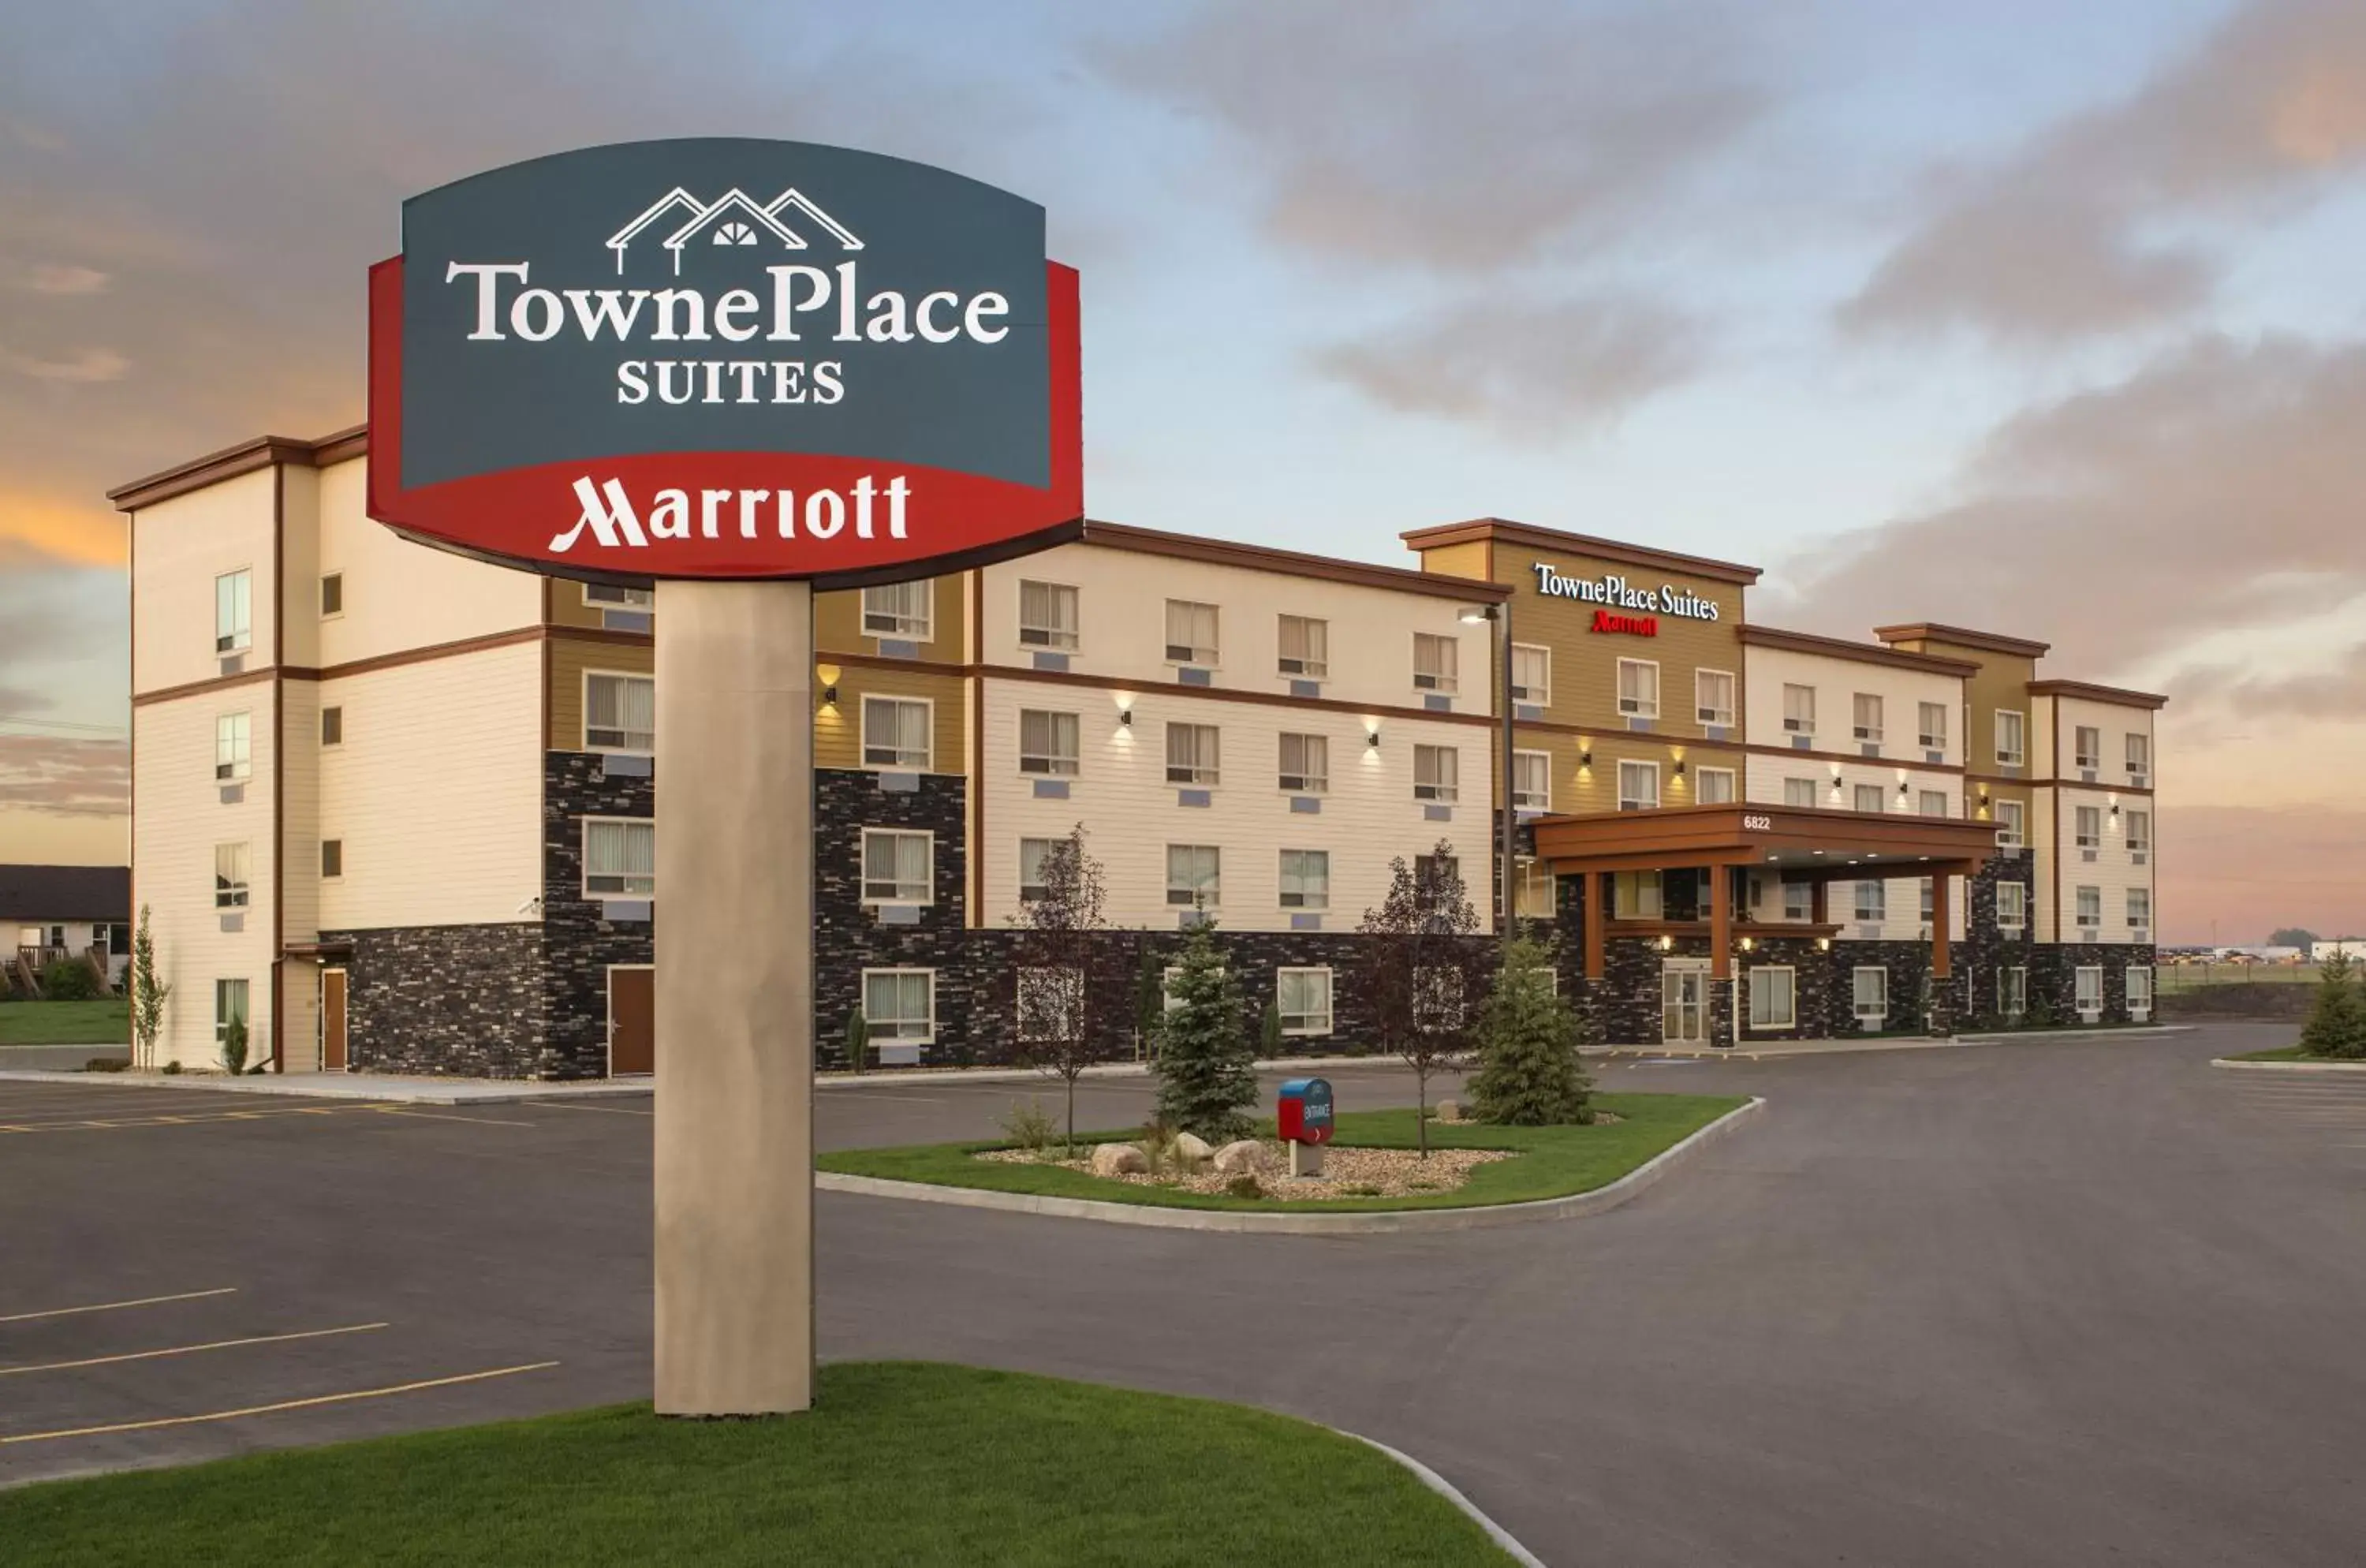 Property Building in TownePlace Suites by Marriott Red Deer